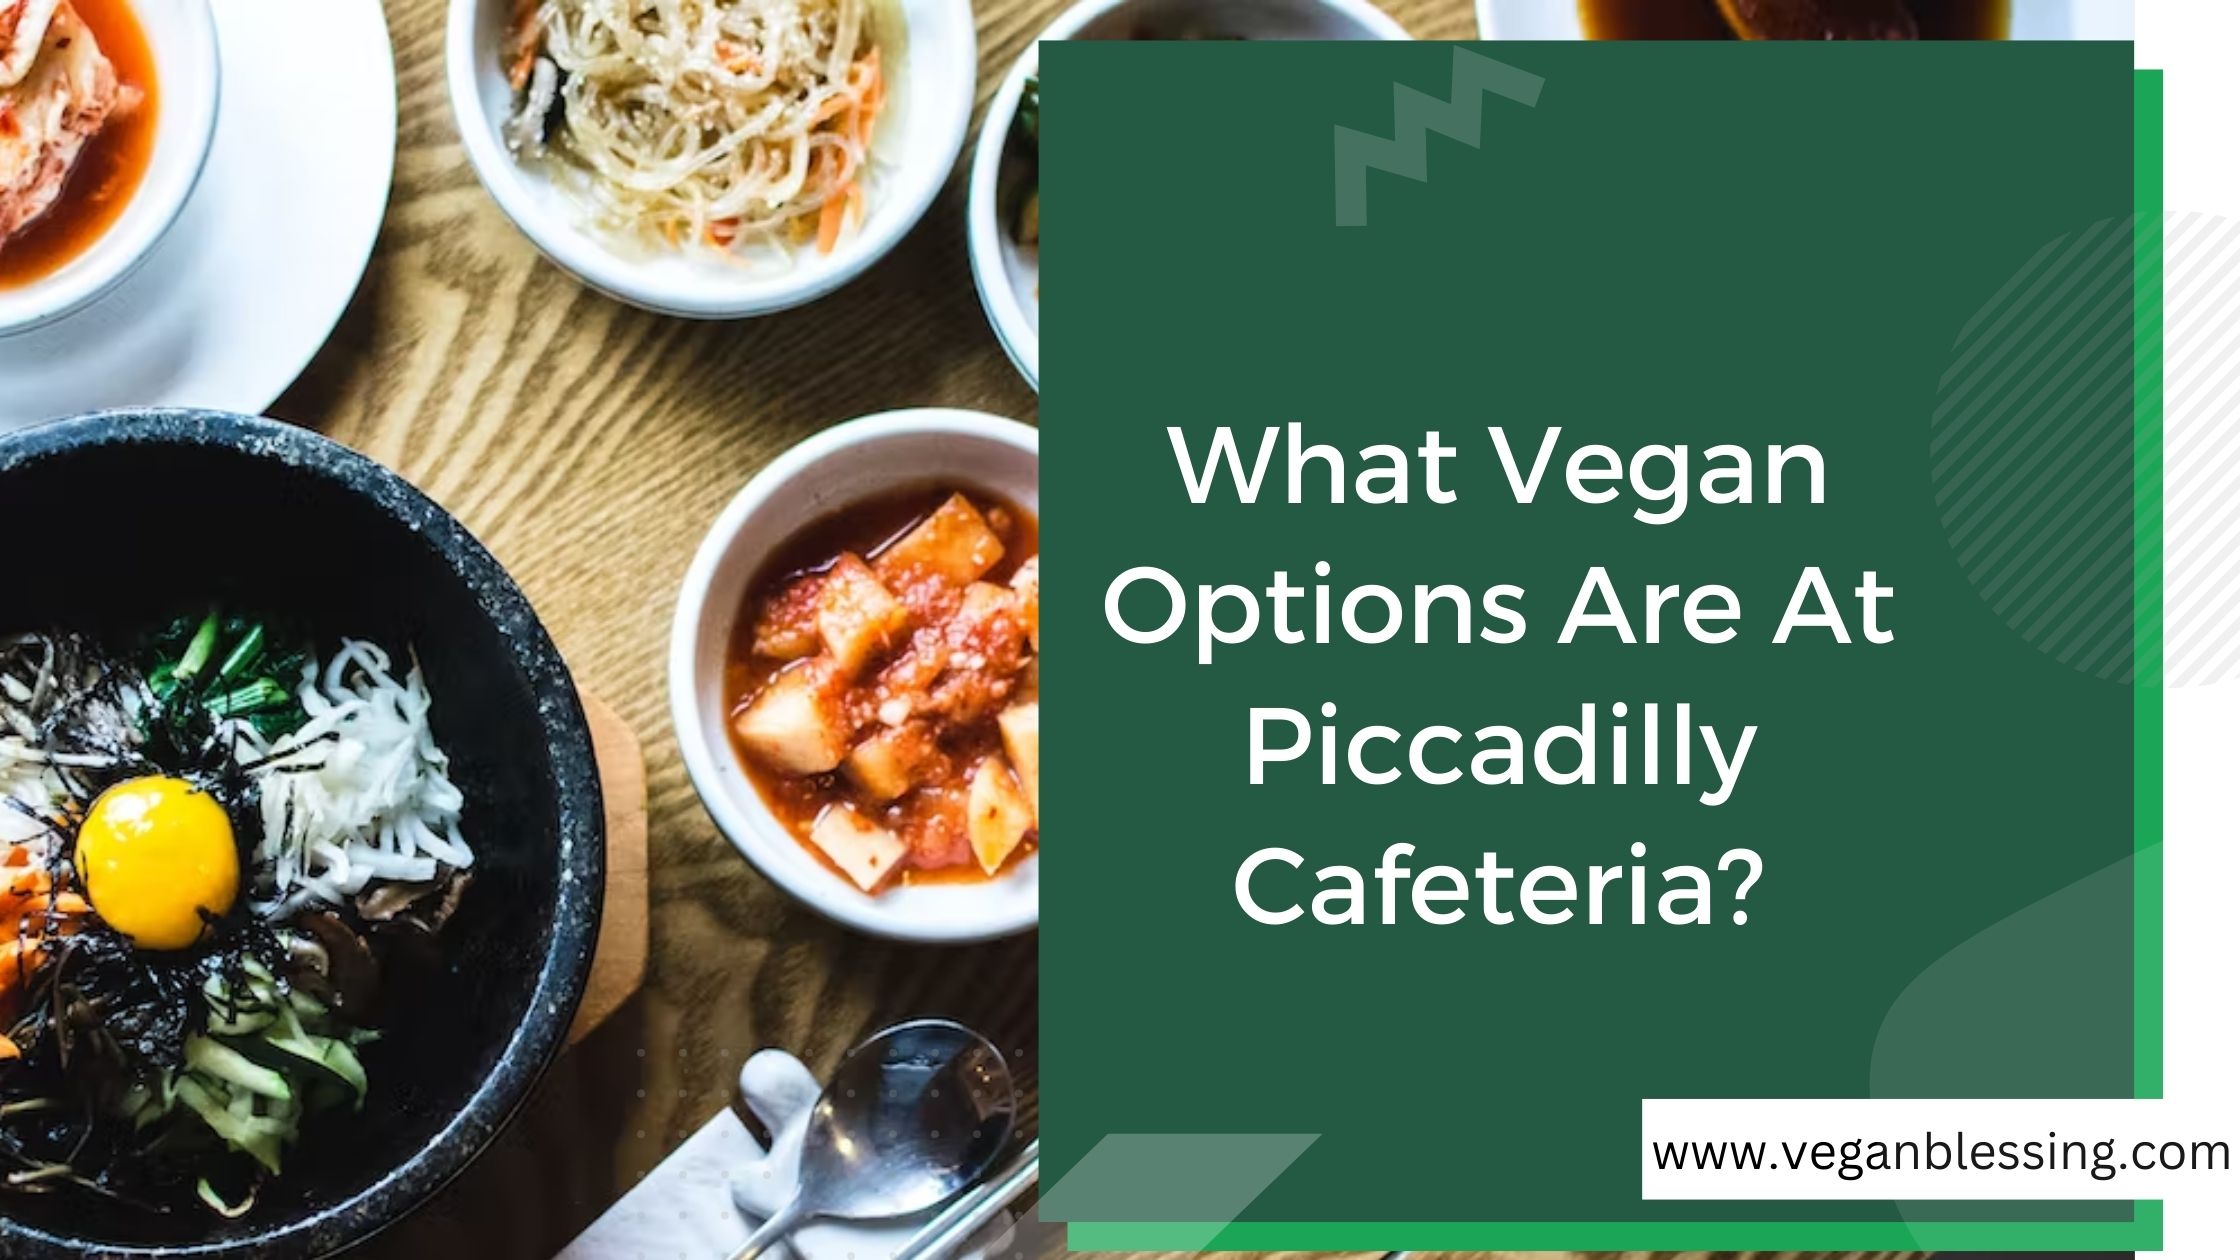 What Vegan Options Are At Piccadilly Cafeteria? What Vegan Options Are At Piccadilly Cafeteria